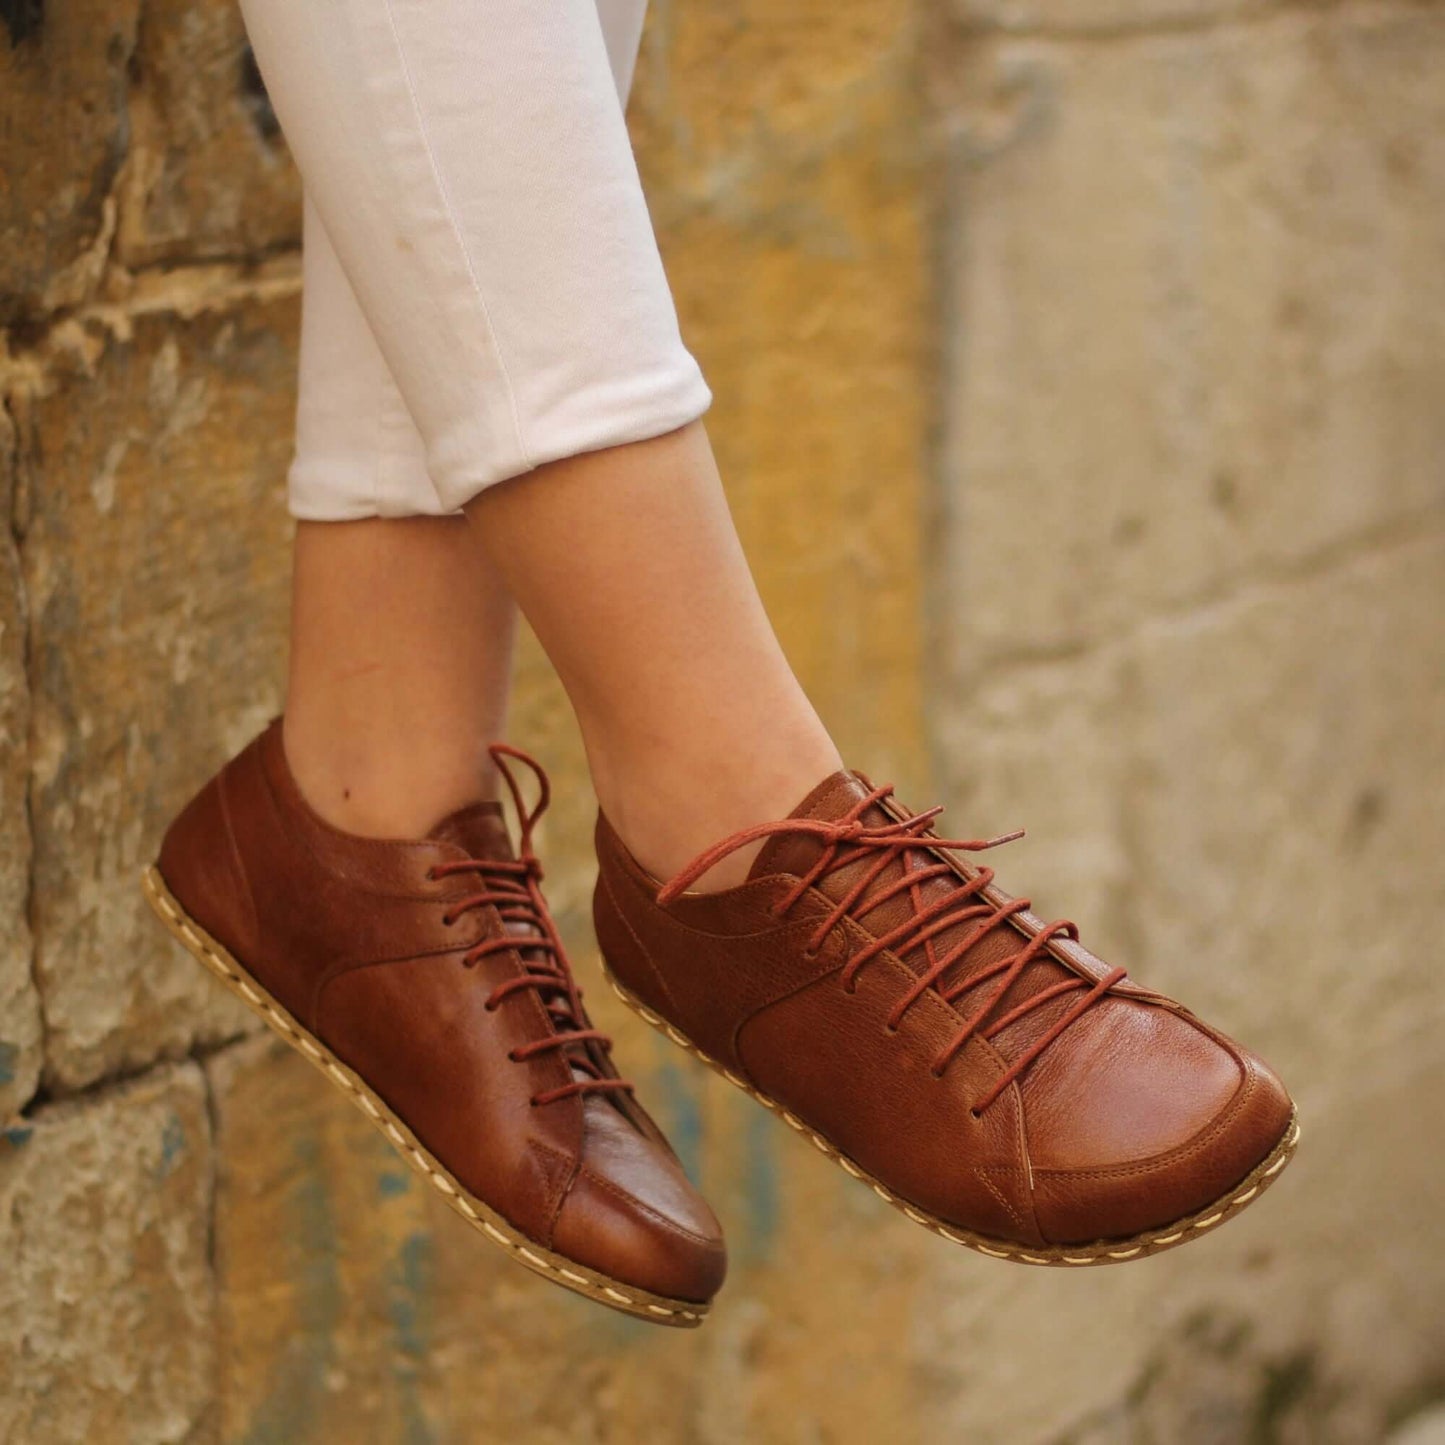 Women's Sneakers From Rare Buffalo Leather, Antique Brown